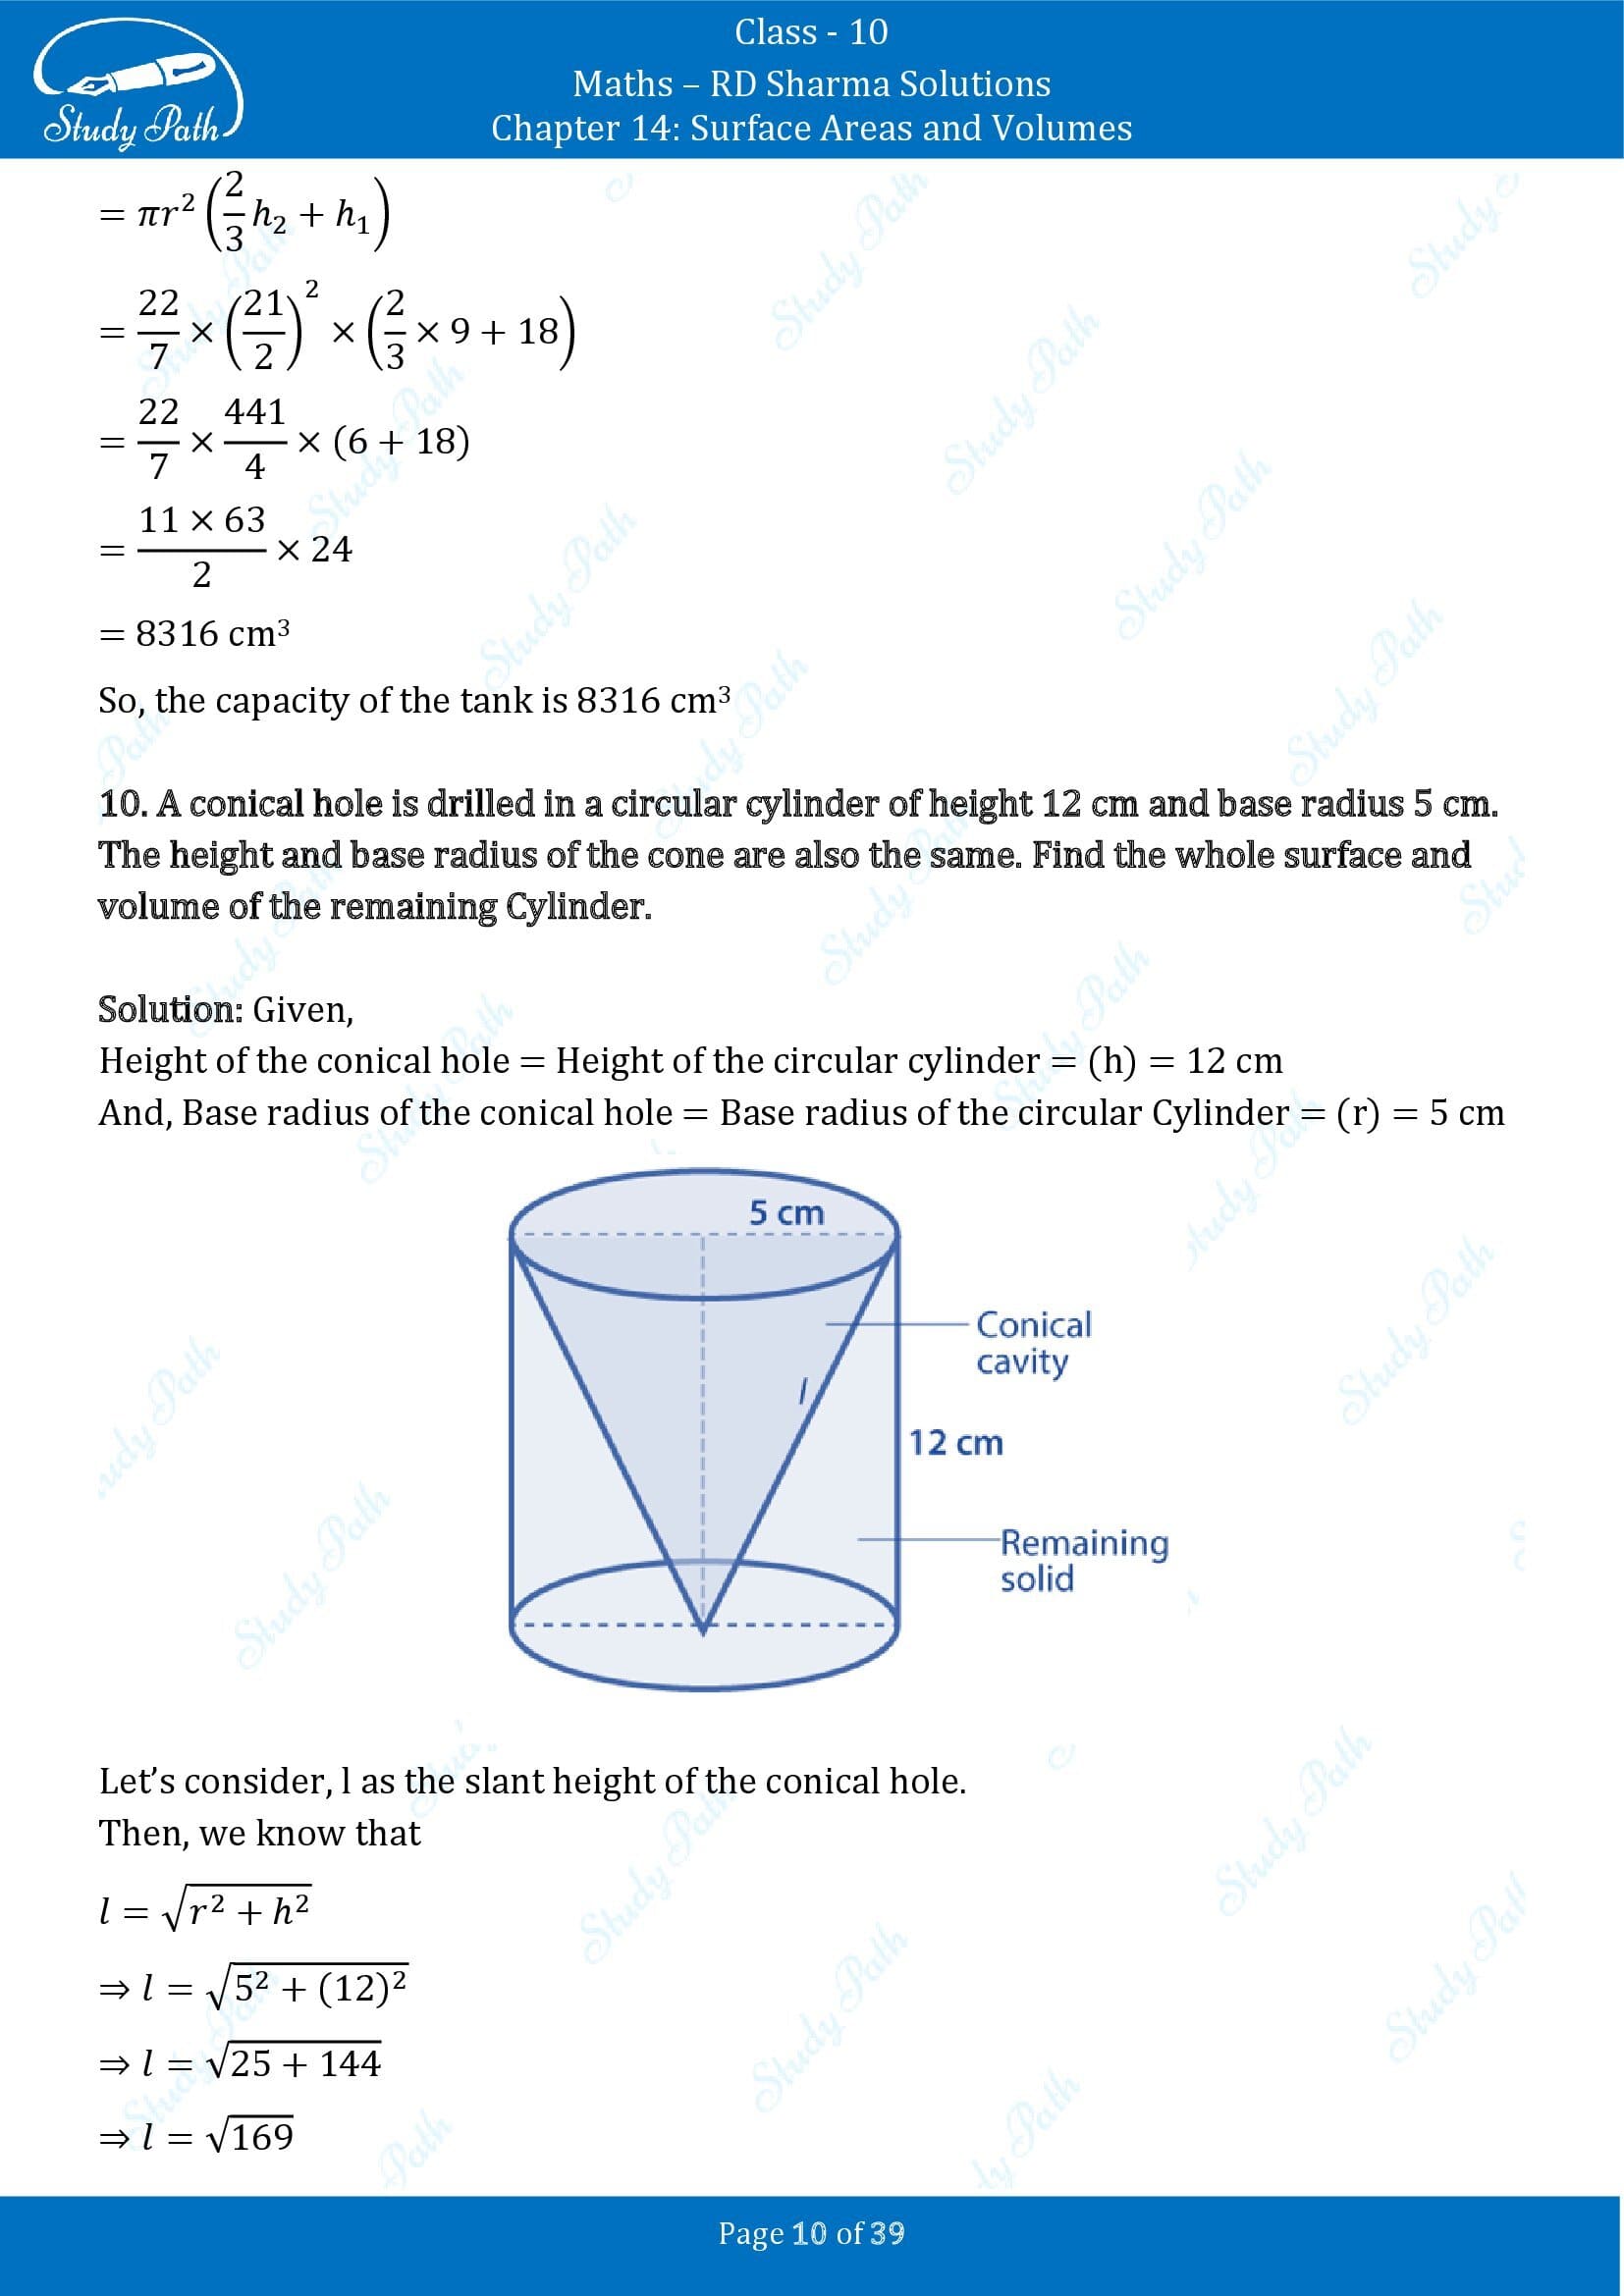 RD Sharma Solutions Class 10 Chapter 14 Surface Areas and Volumes Exercise 14.2 00010